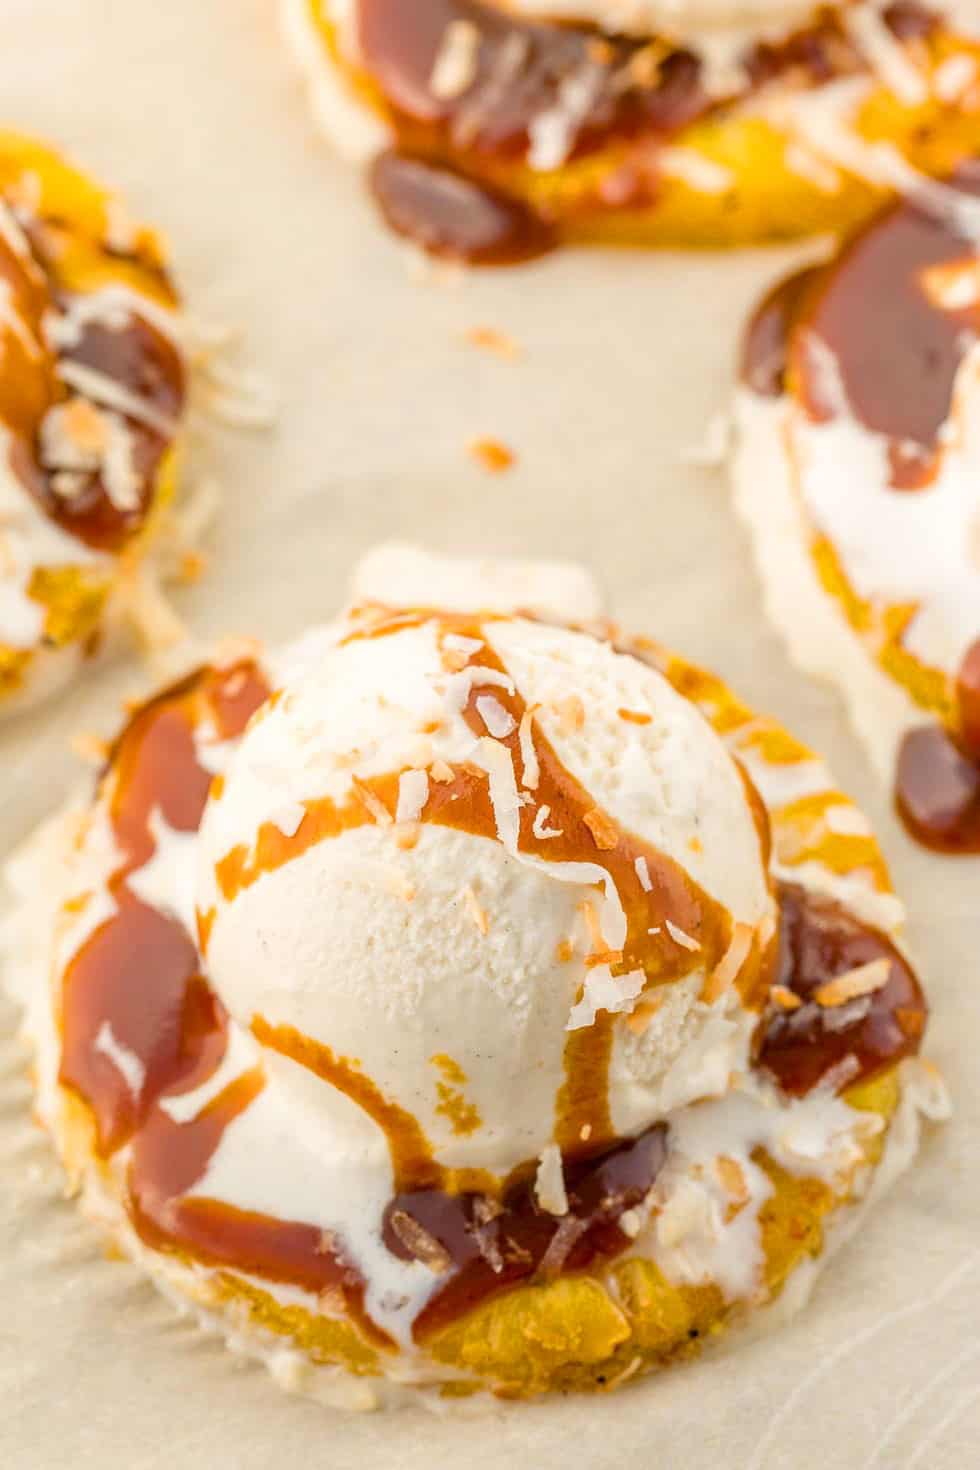 Delicious Grilled Pineapple Sundaes - Maria's Kitchen